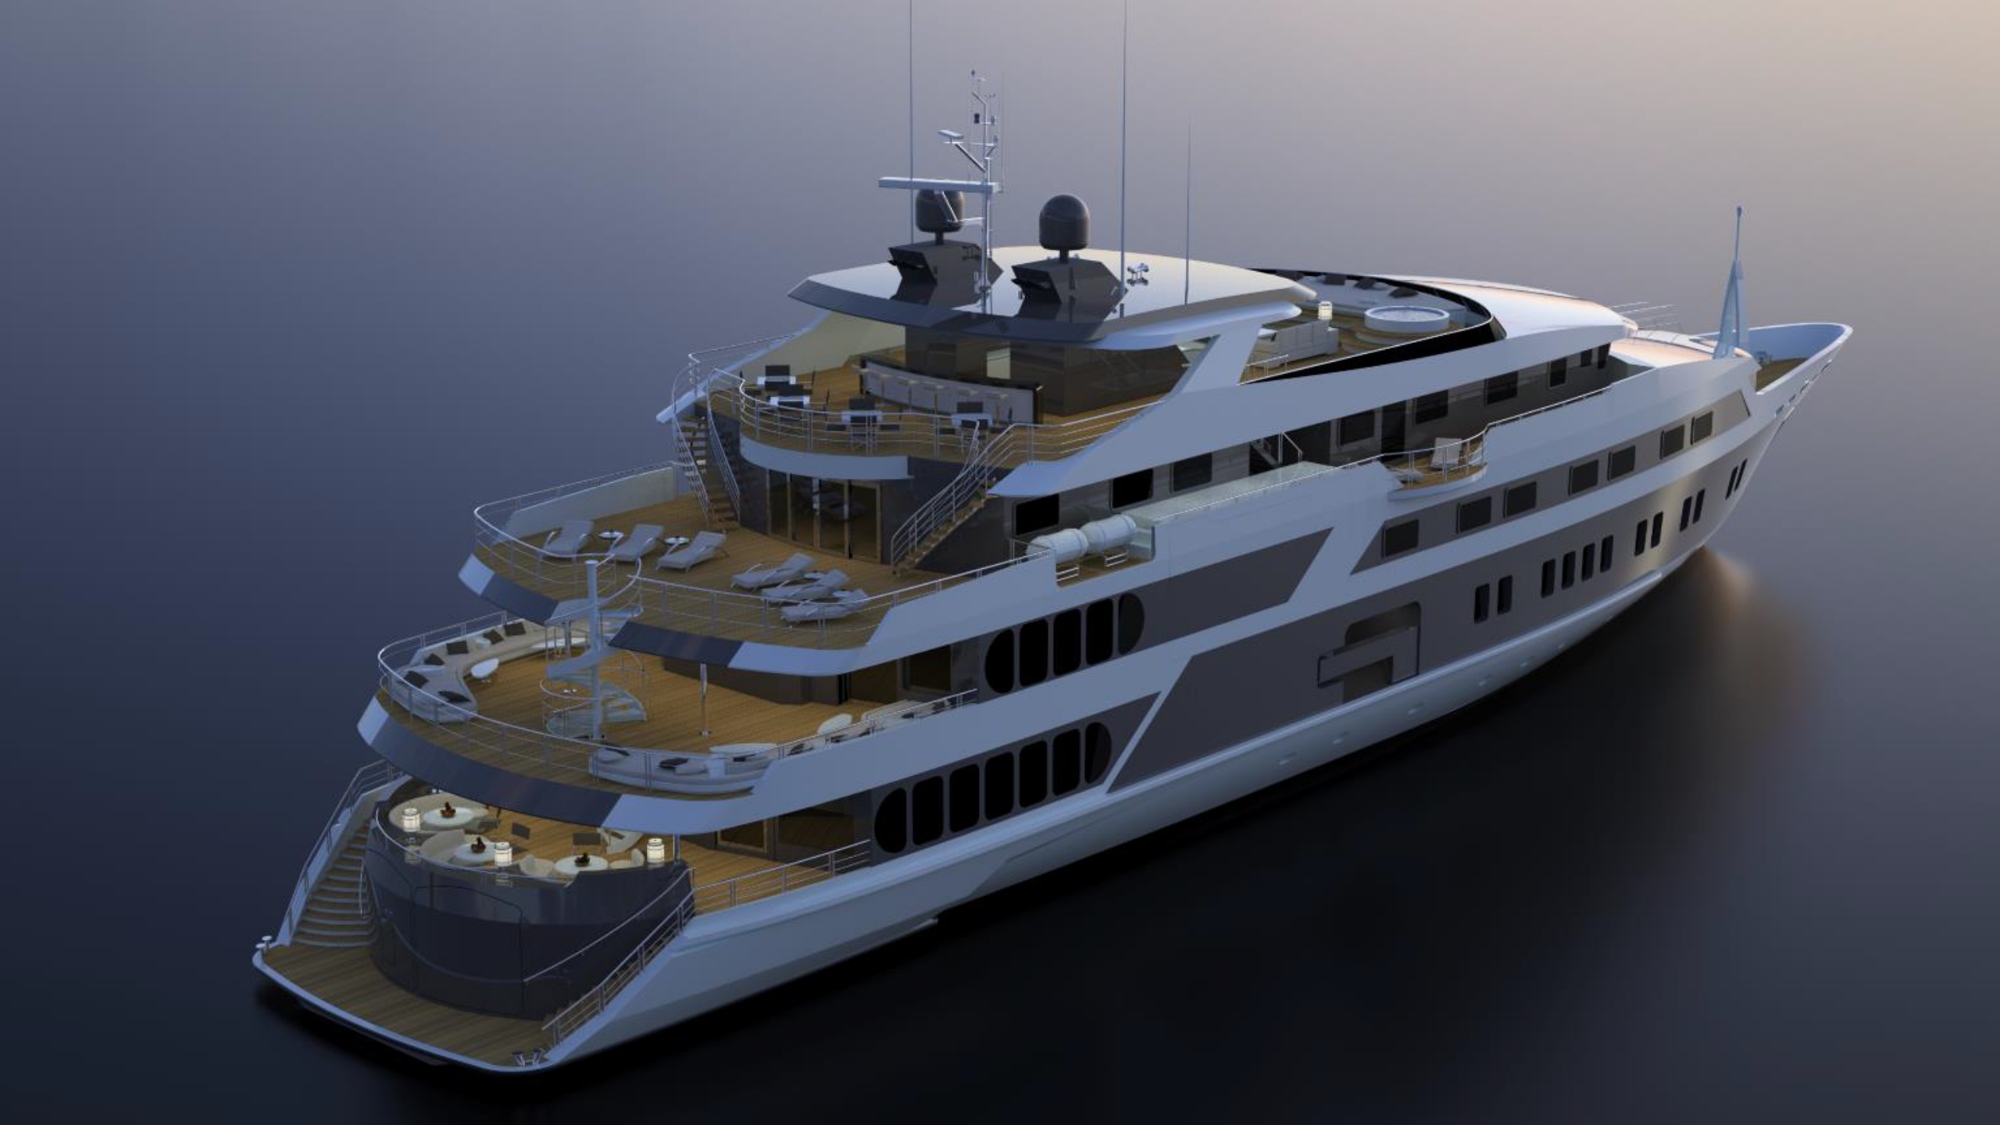 The 72m Yacht SERENITY